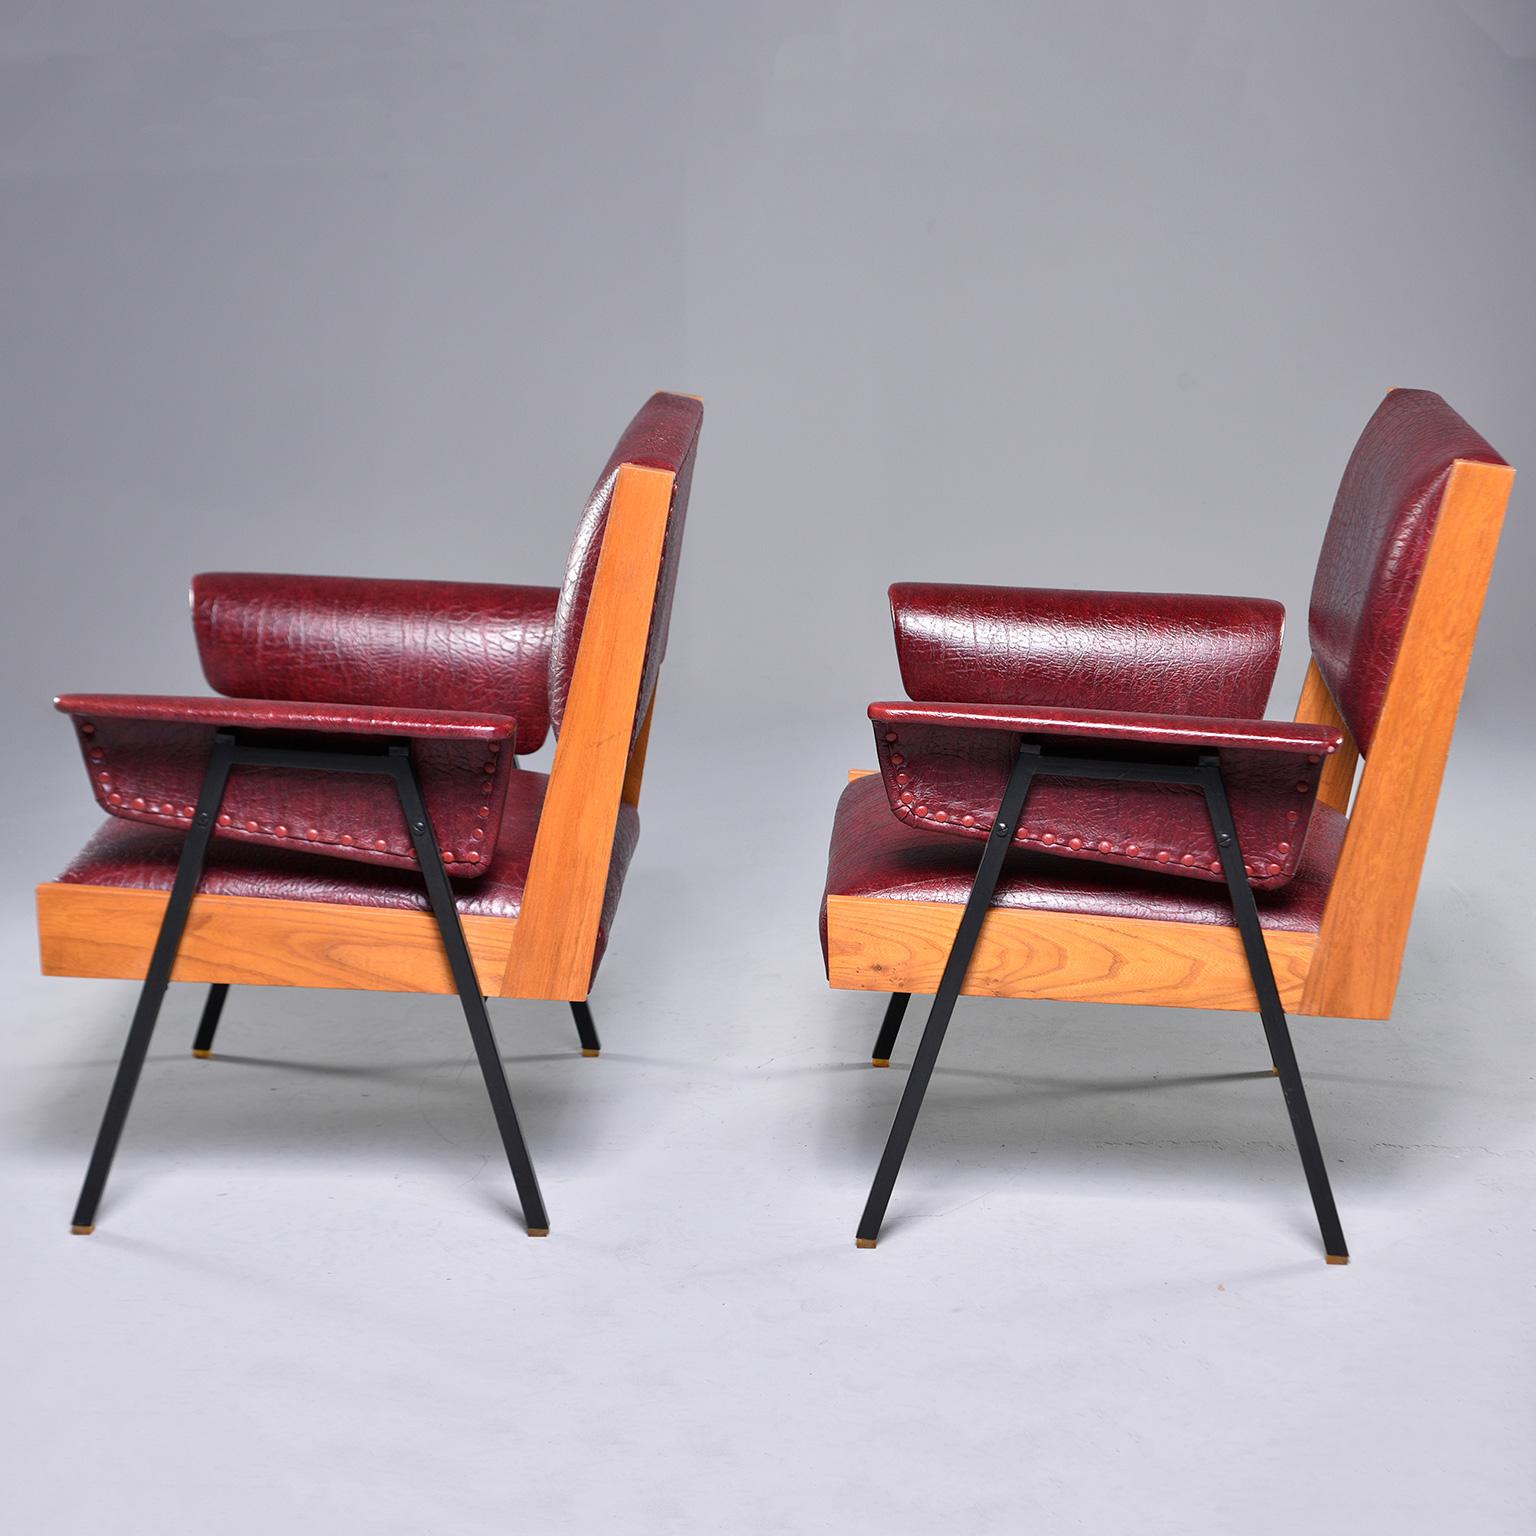 European Pair of Midcentury Armchairs with Wood Frames and Metal Legs